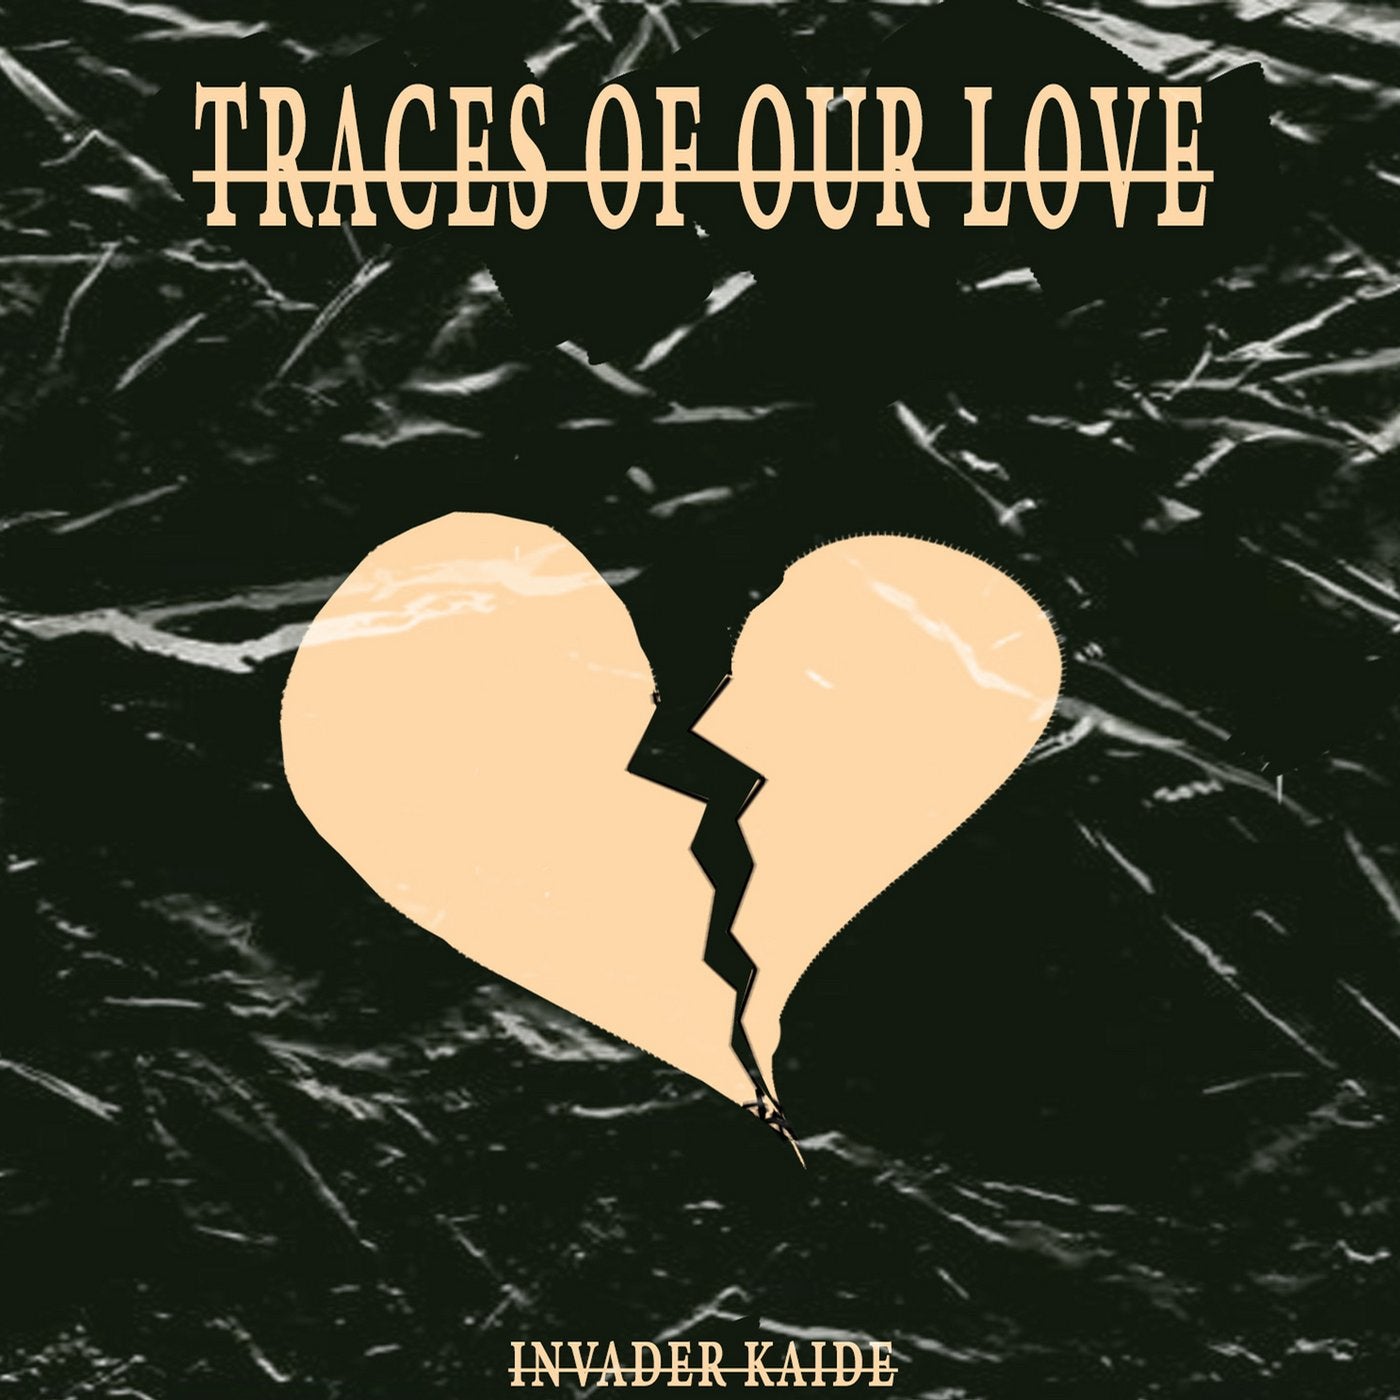 Traces of Our Love